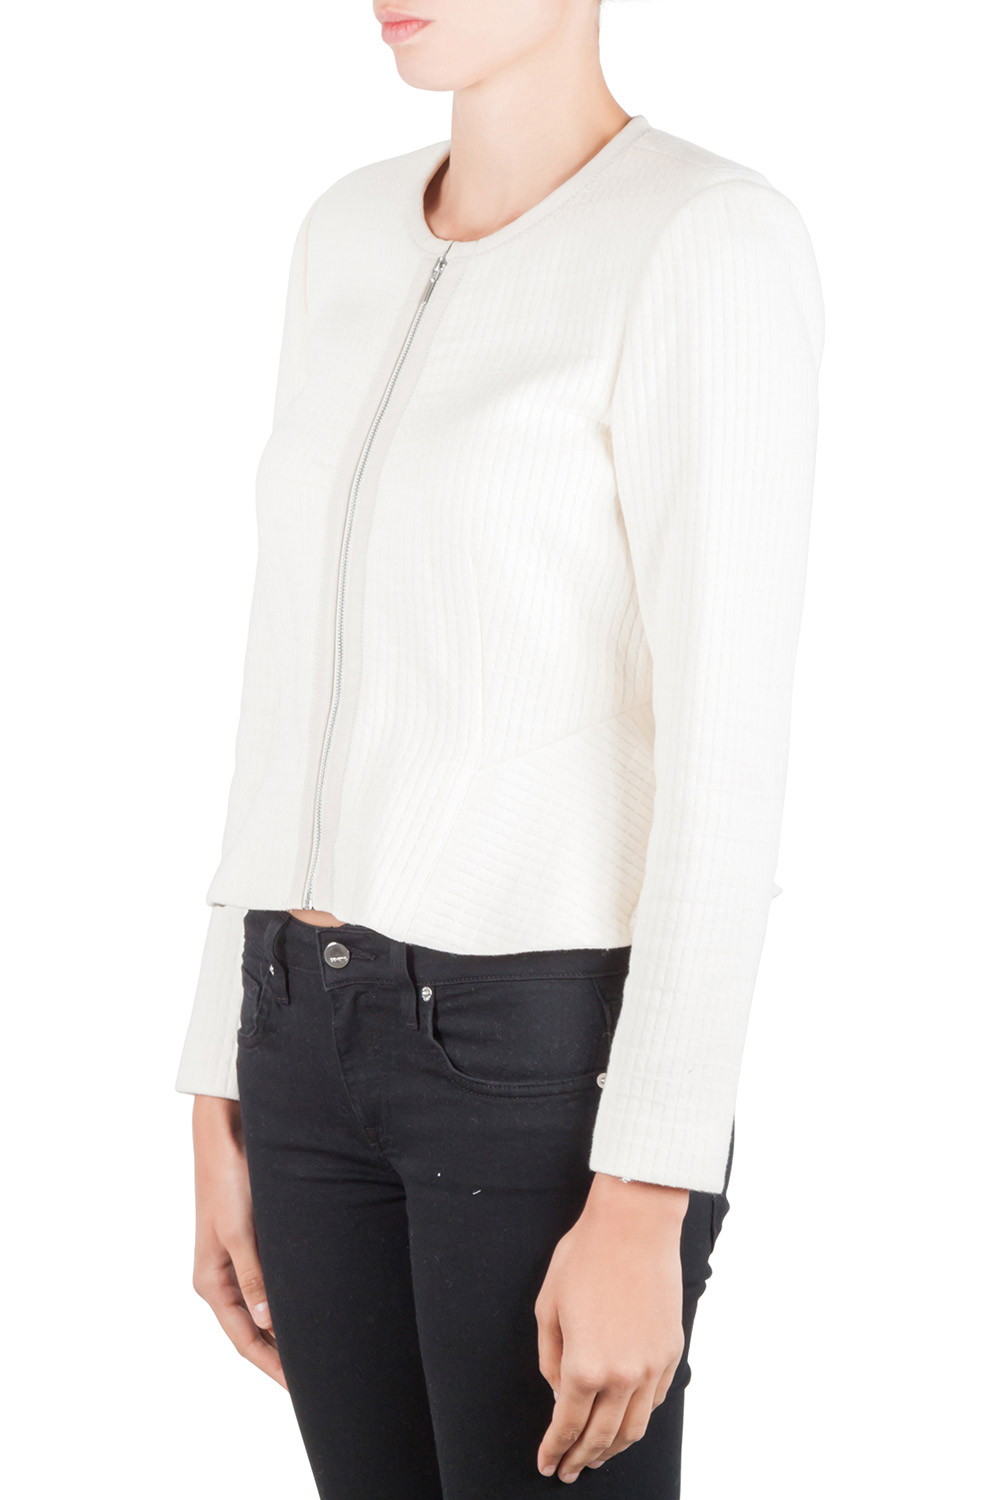 

Rebecca Taylor Chalk White Double Face Cotton Jersey Zip Front Jacket, Cream